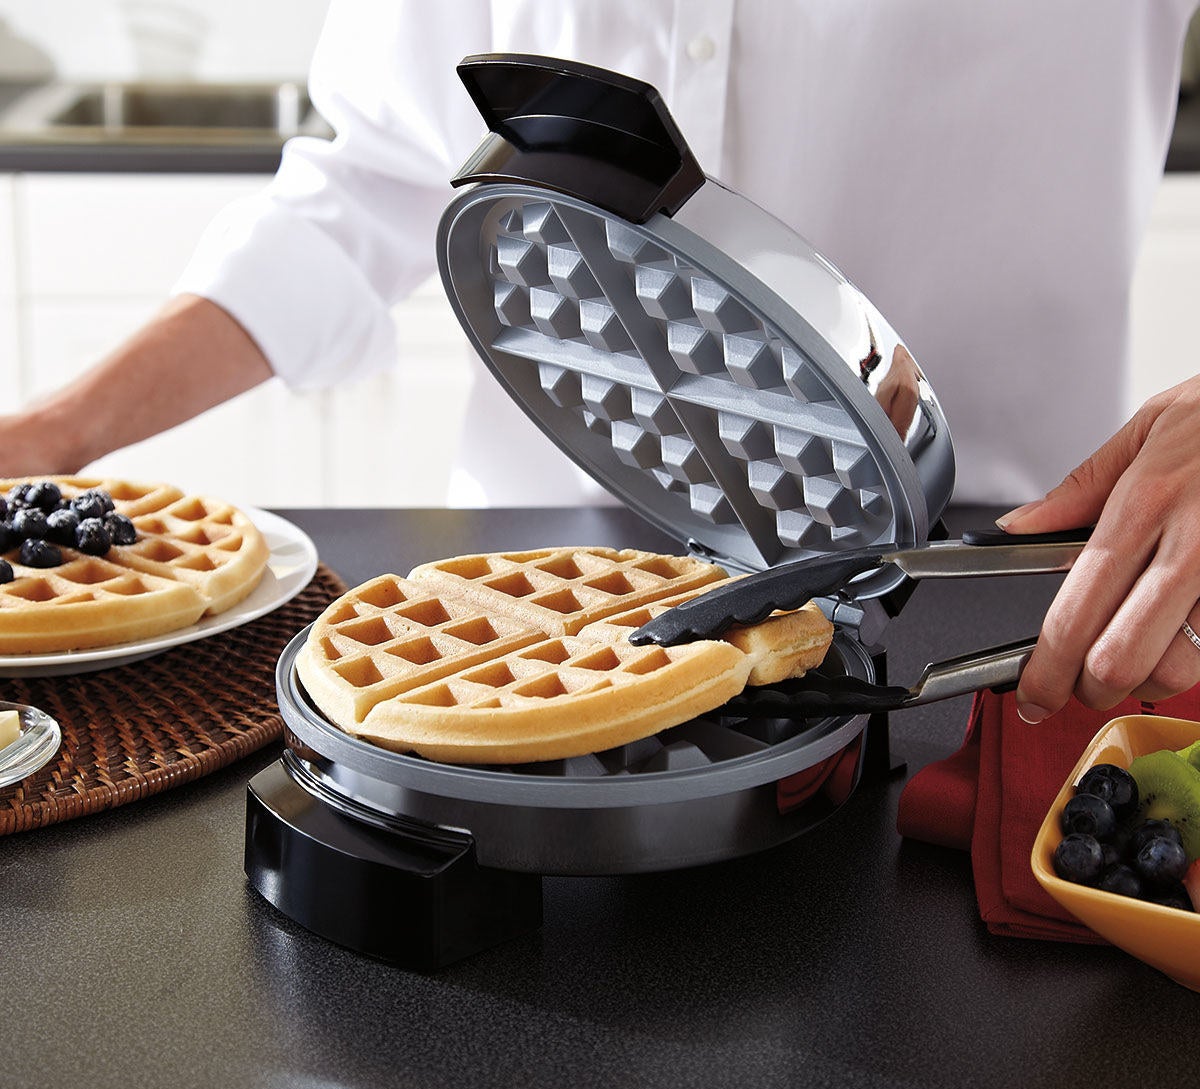 Someone removing a cooked waffle from the silver waffle maker